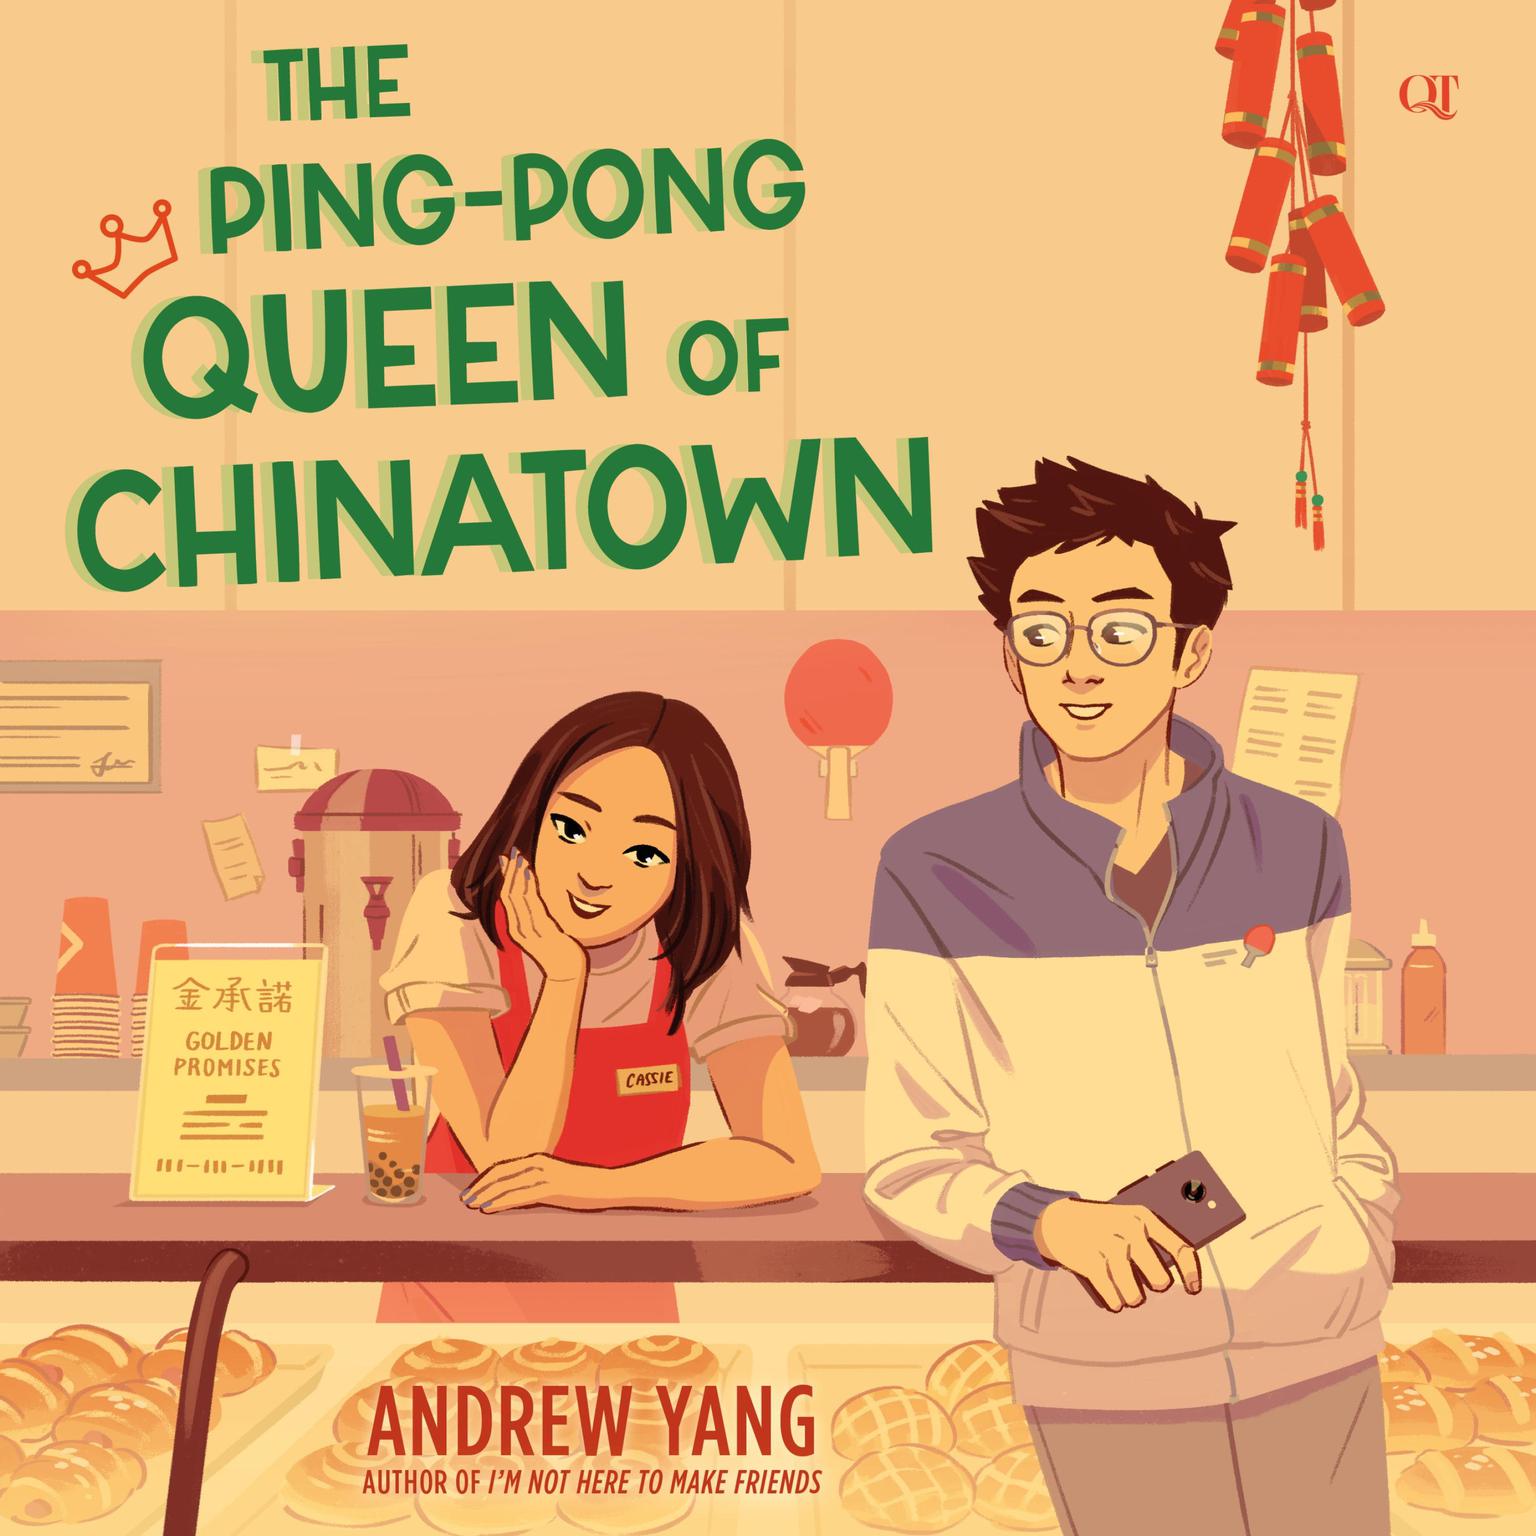 The Ping-Pong Queen of Chinatown (Abridged) Audiobook, by Andrew Yang